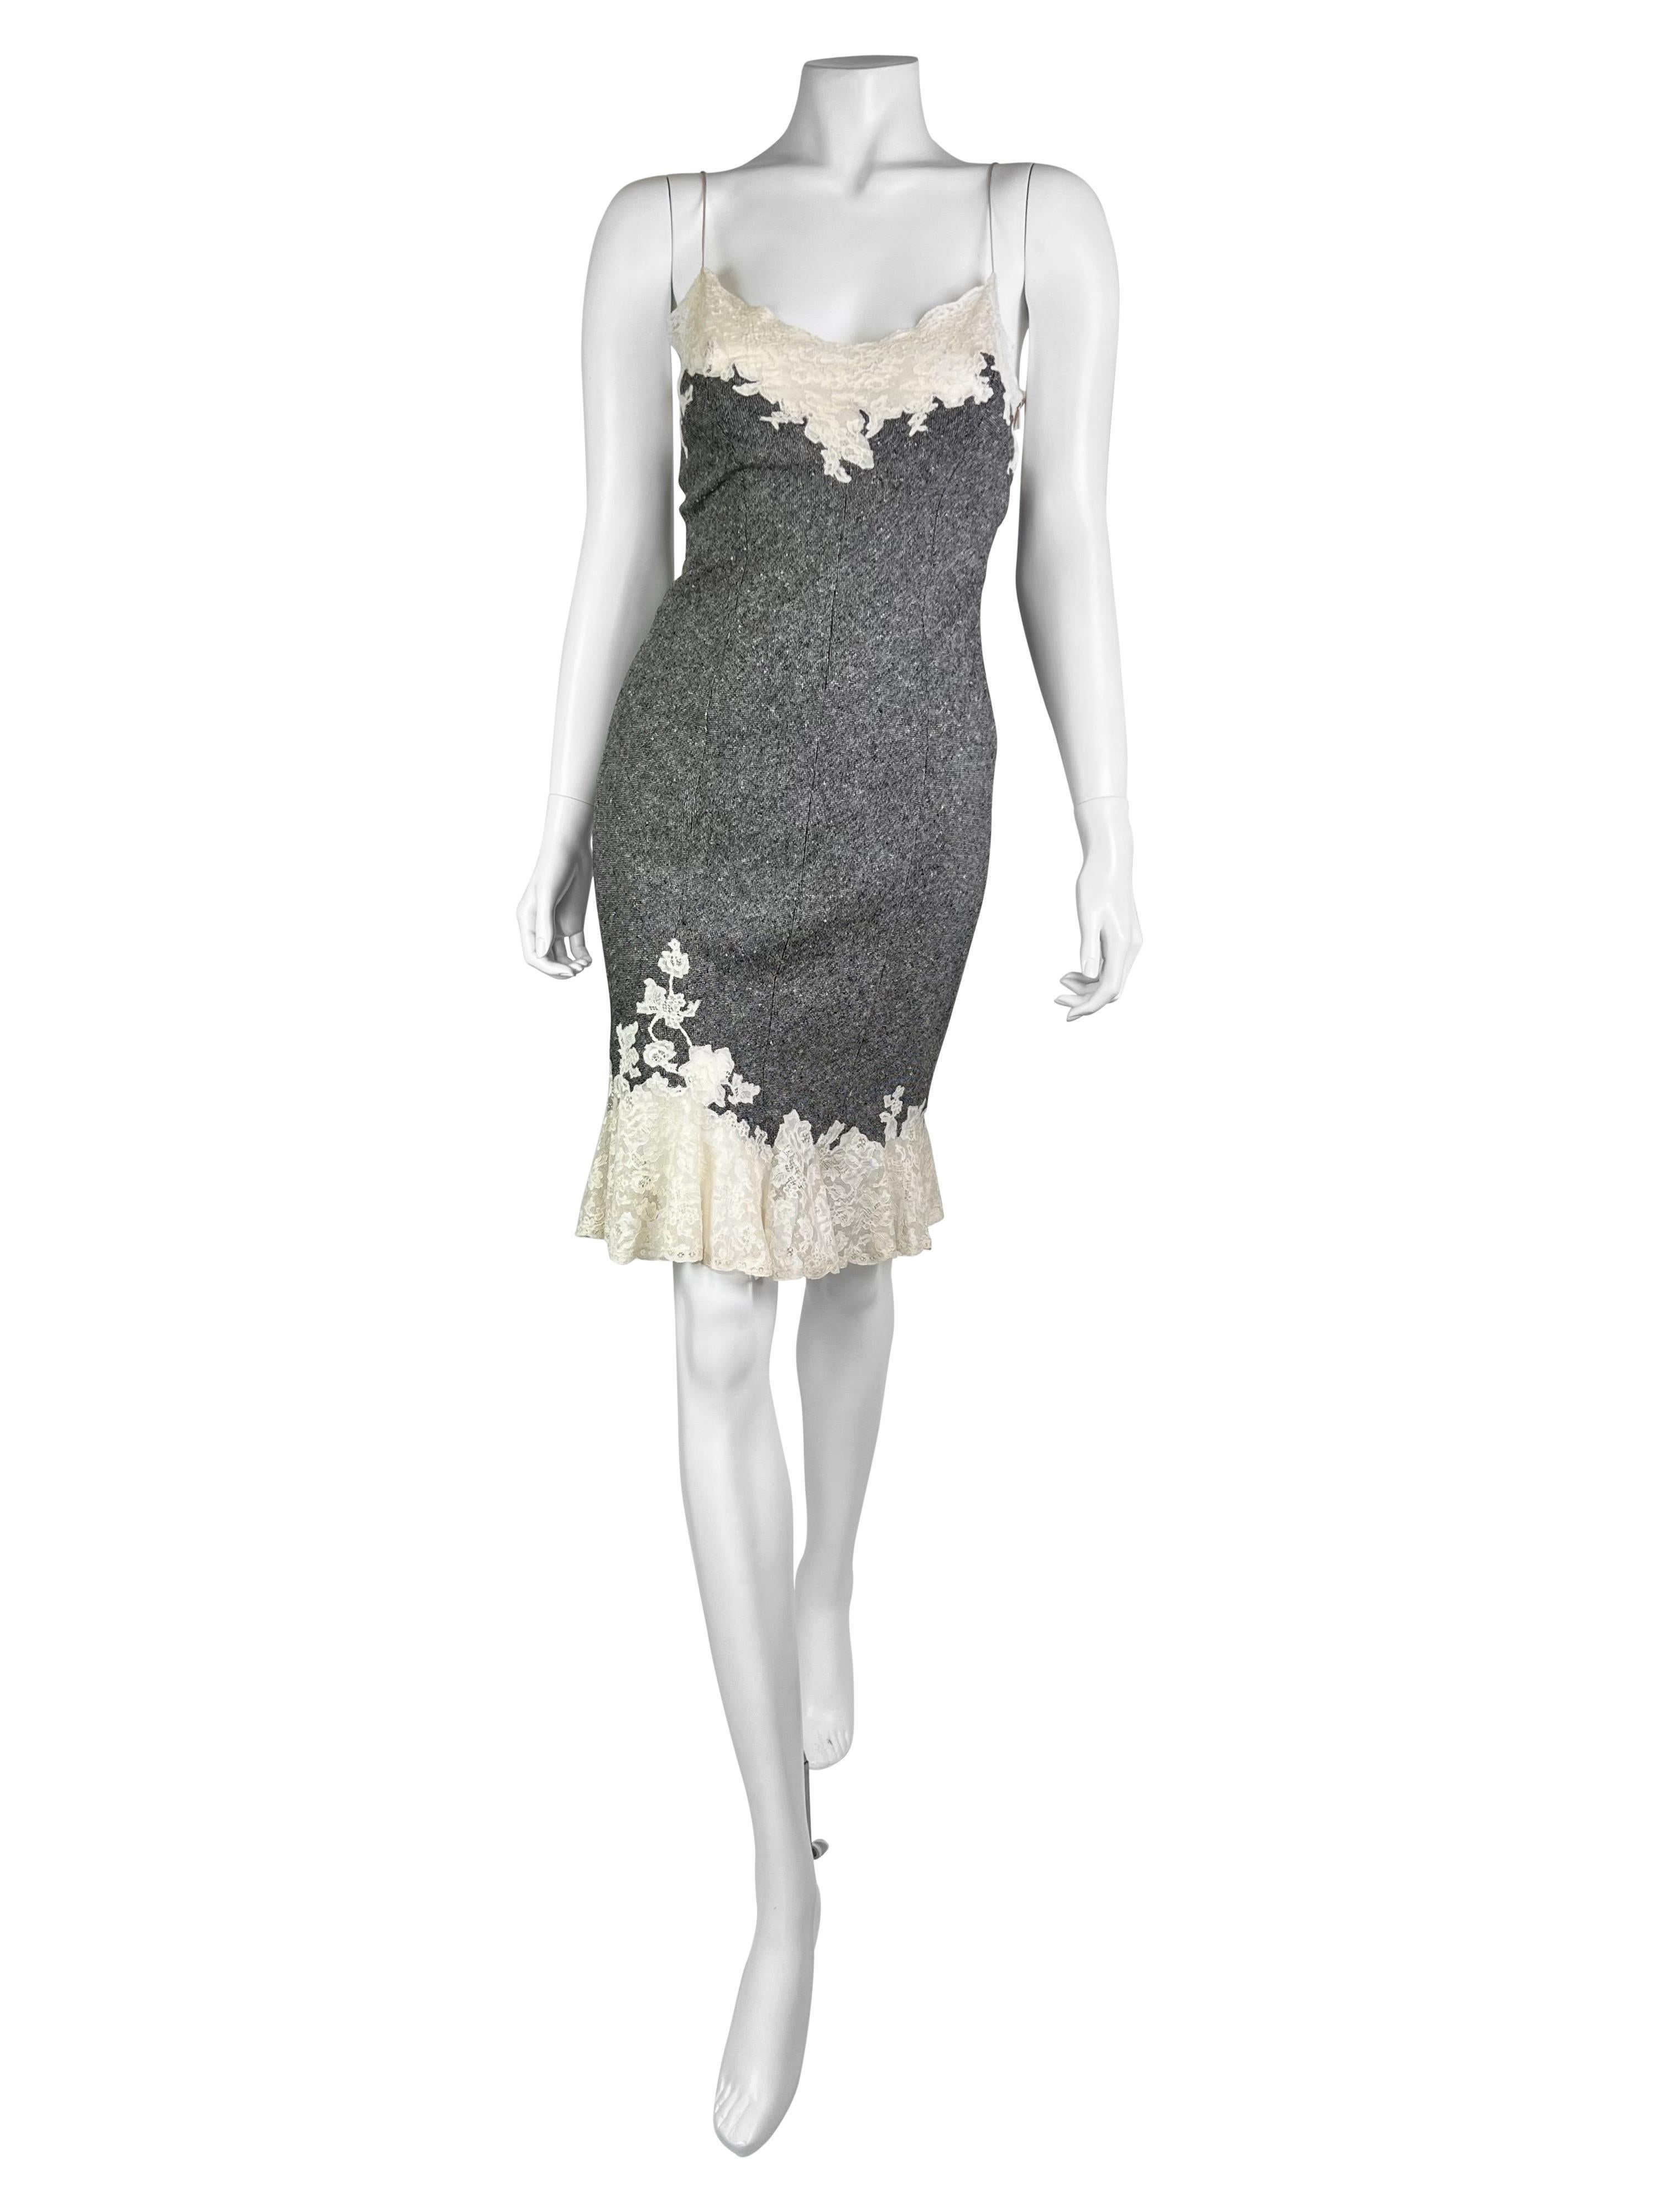 Dior by John Galliano Fall 1998 RTW Tweed Dress with Lace Trim For Sale ...